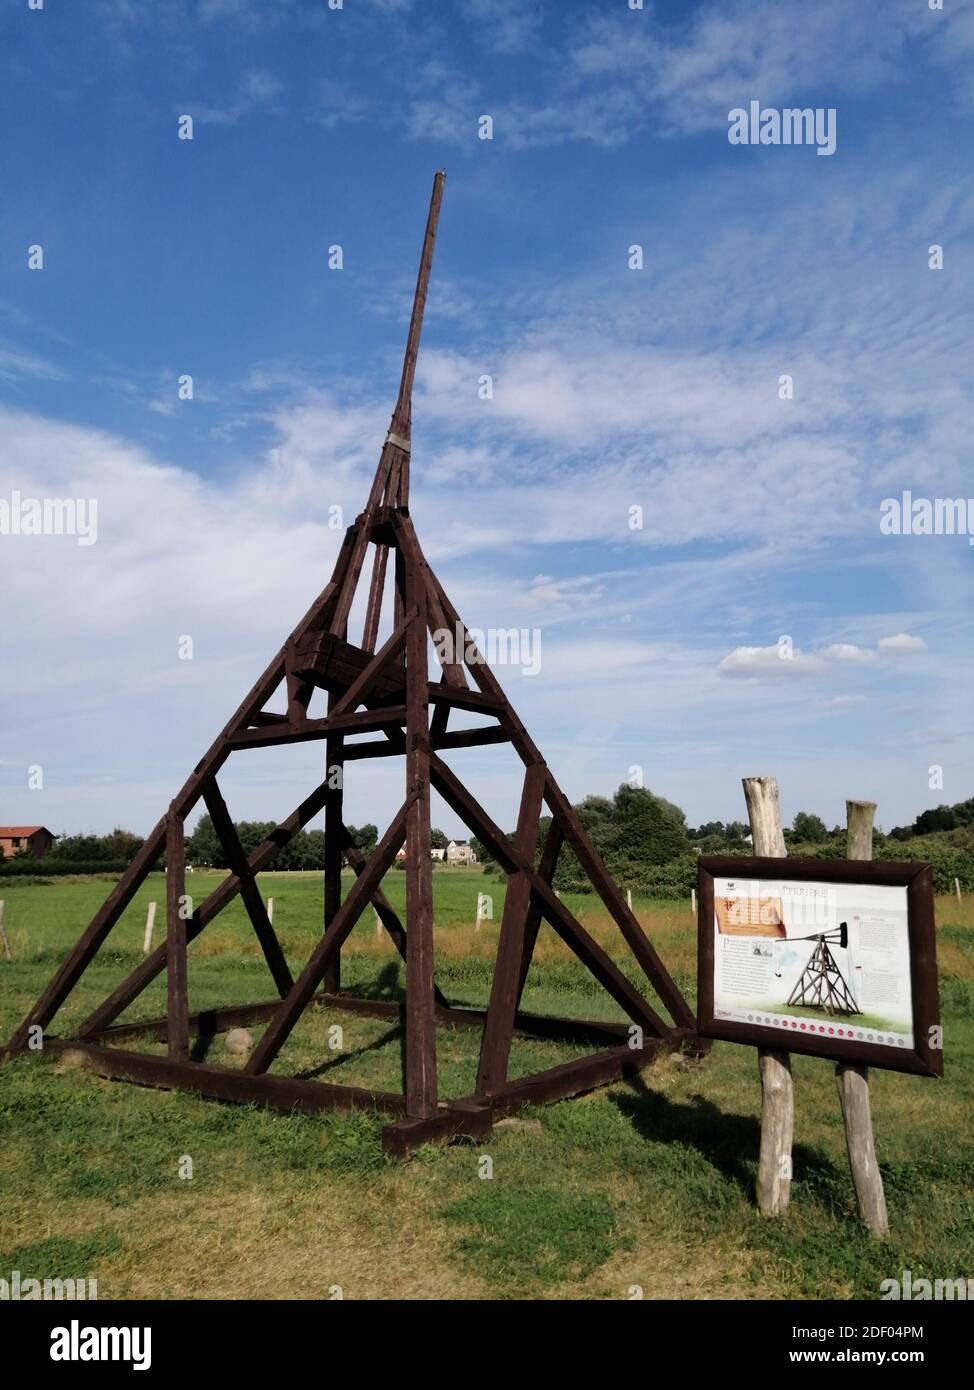 WENECJA, POLAND - Aug 20, 2020: High wooden old medieval exposition catapult at a museum Stock Photo